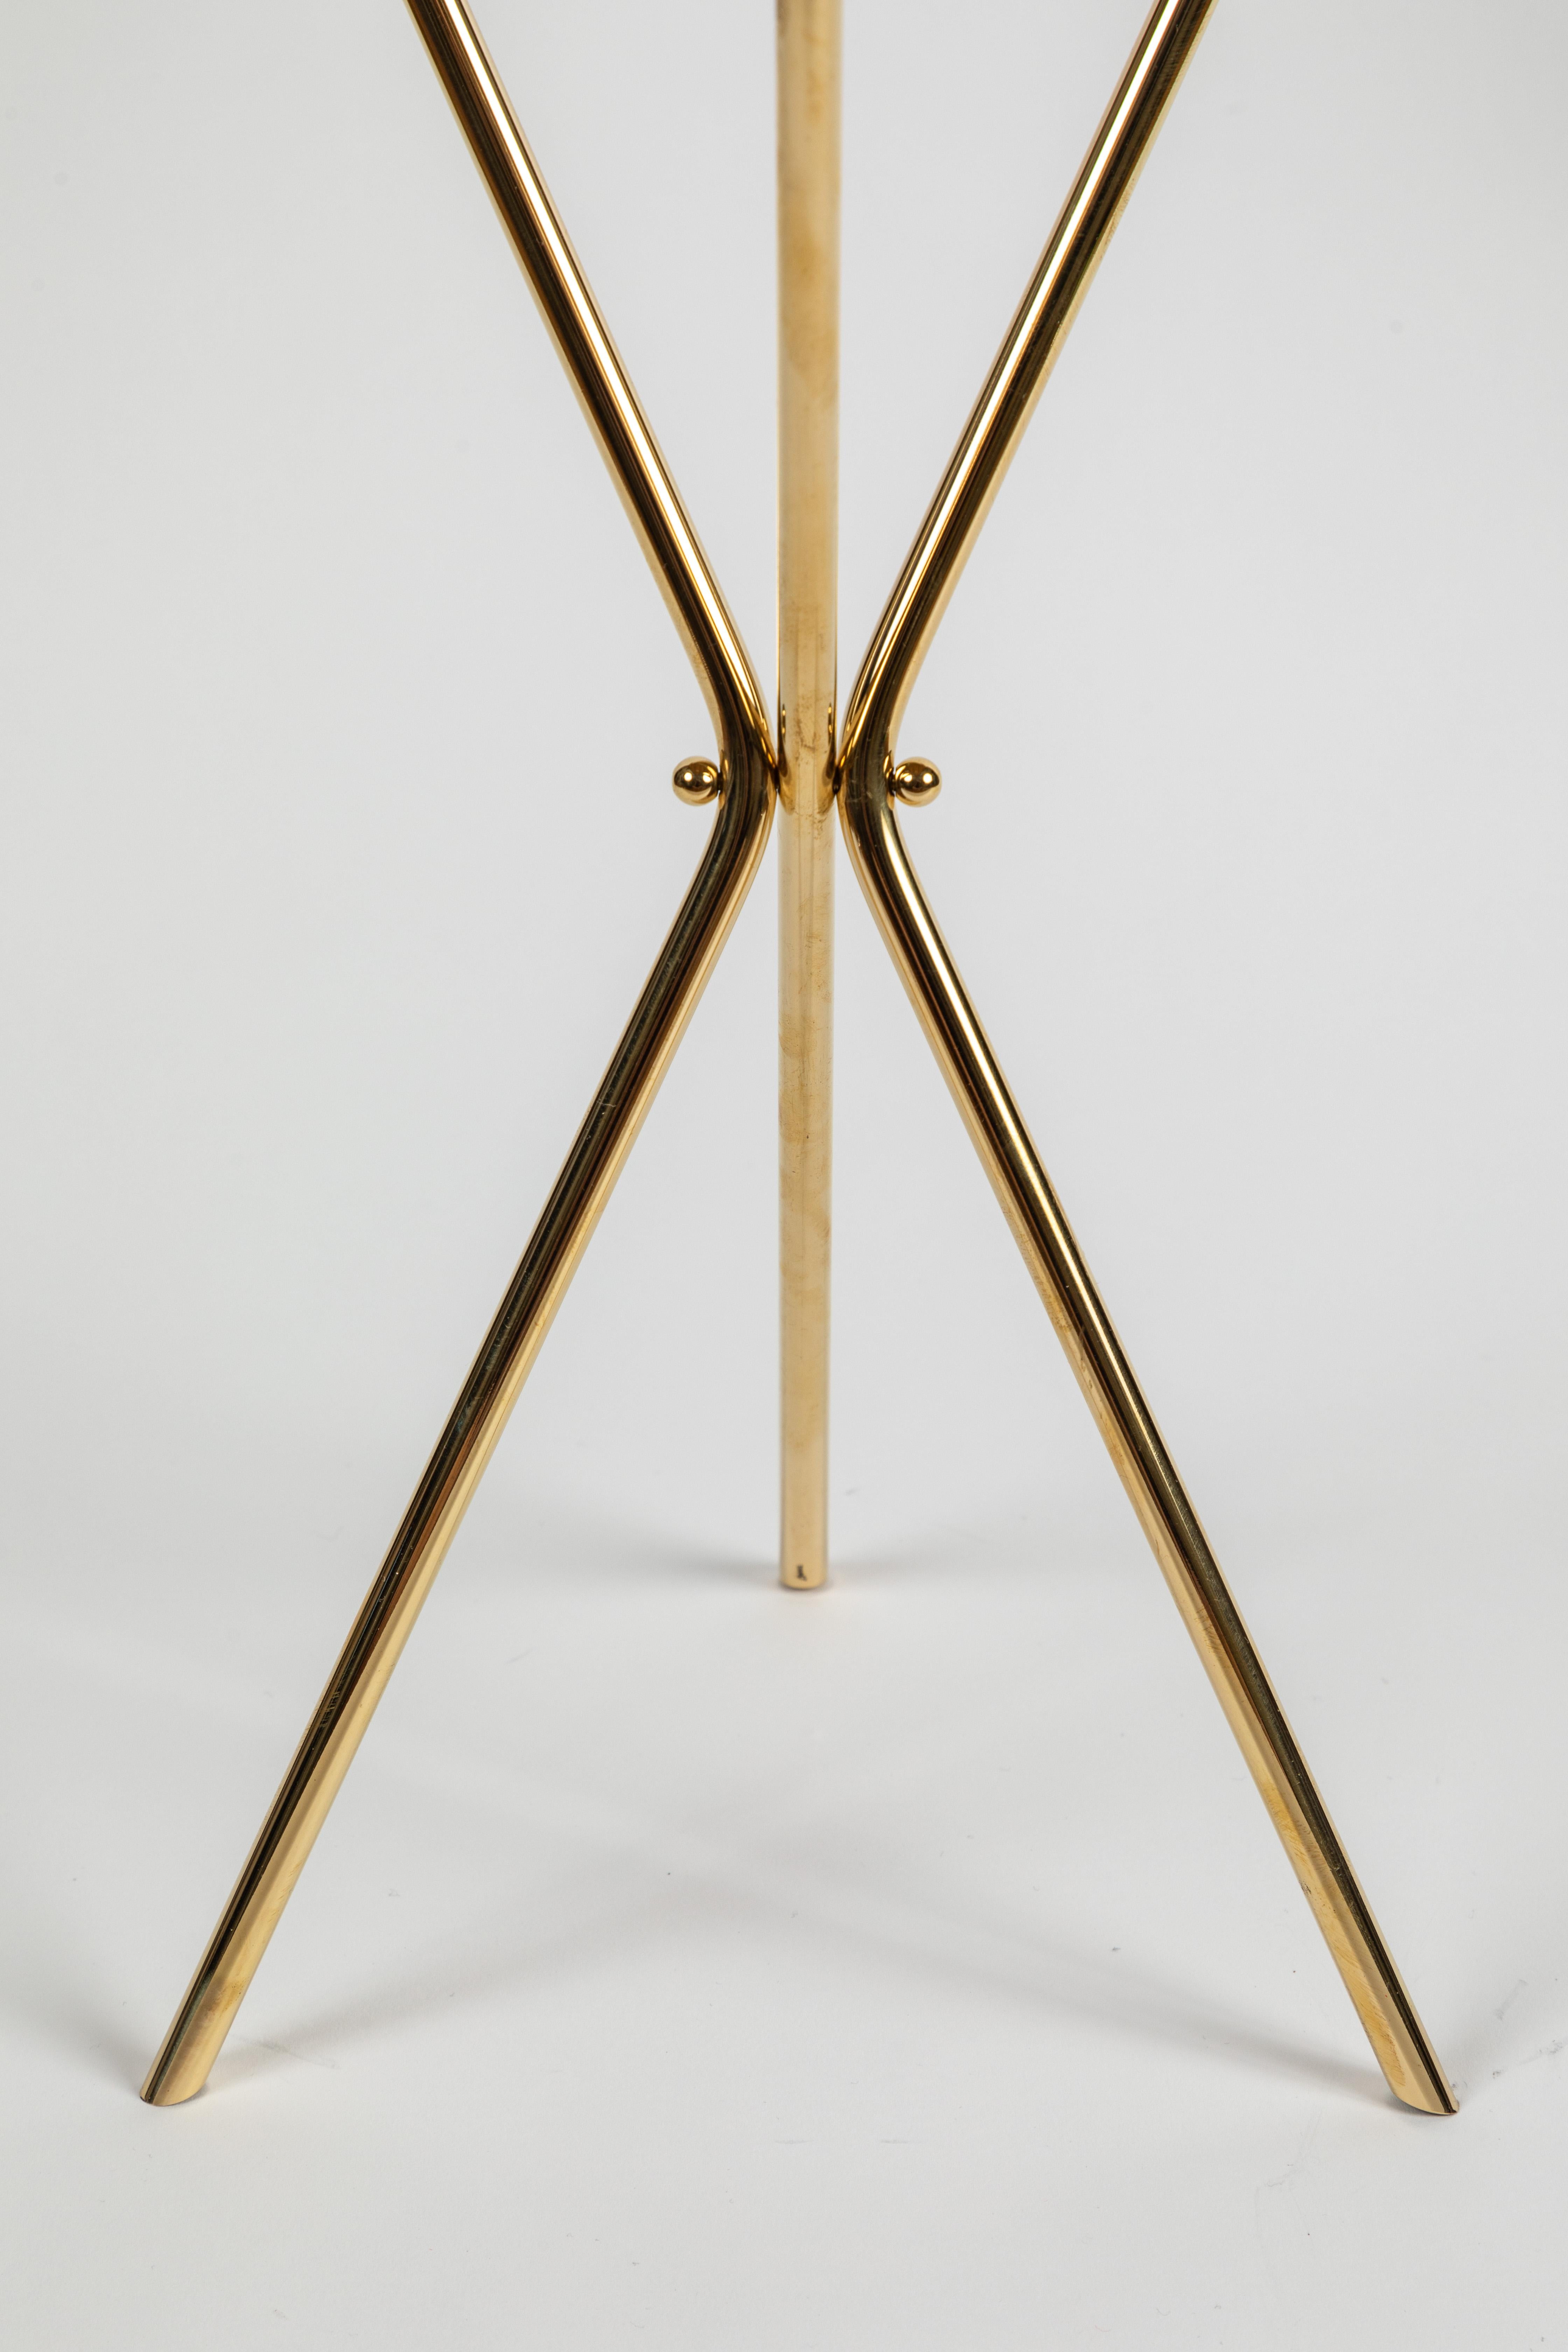 Contemporary Carl Auböck Model #3642 Brass and Leather Table For Sale